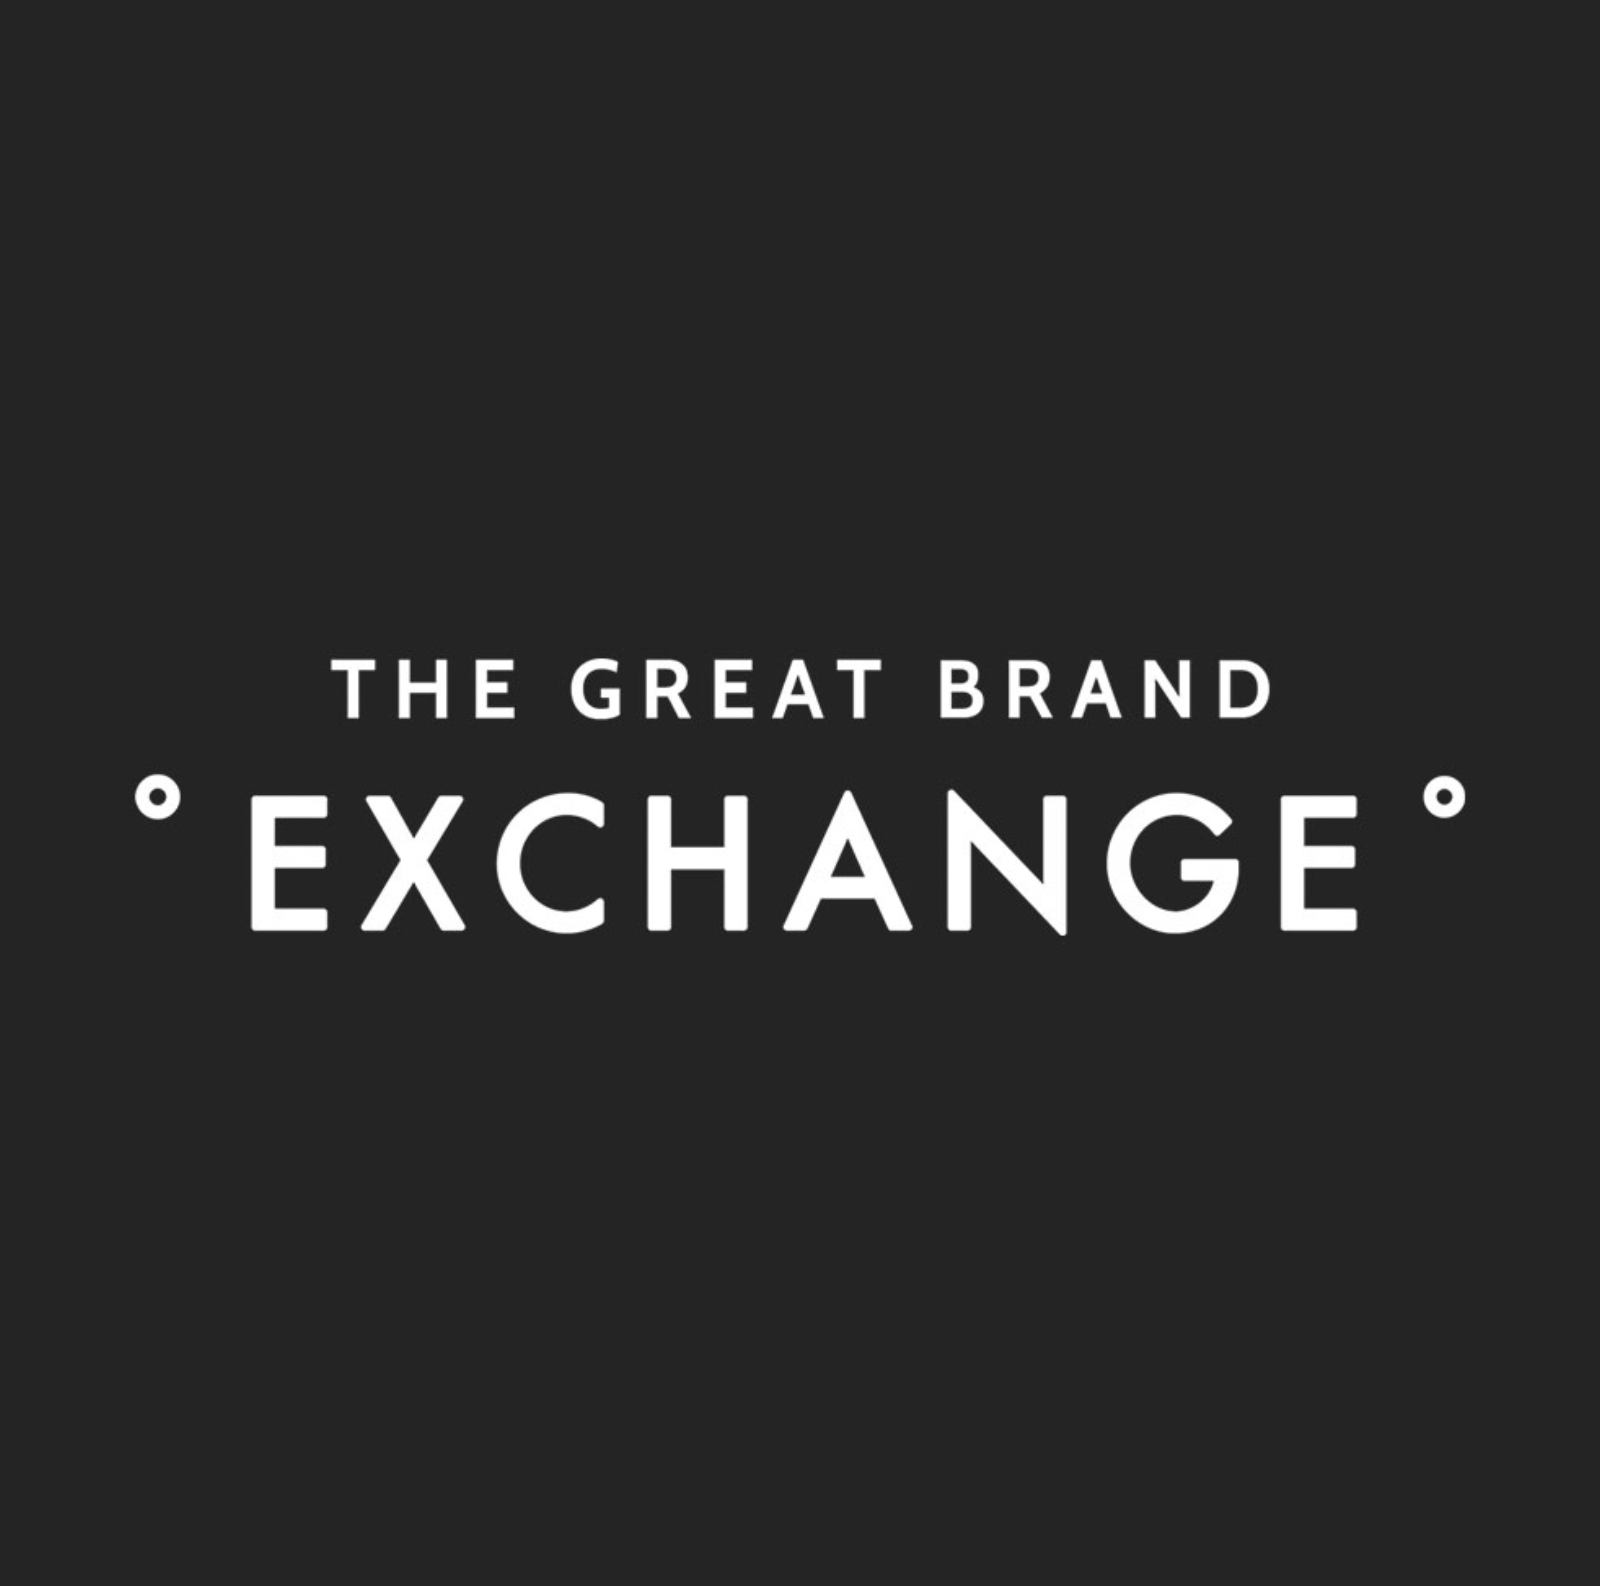 The Great Brand Exchange